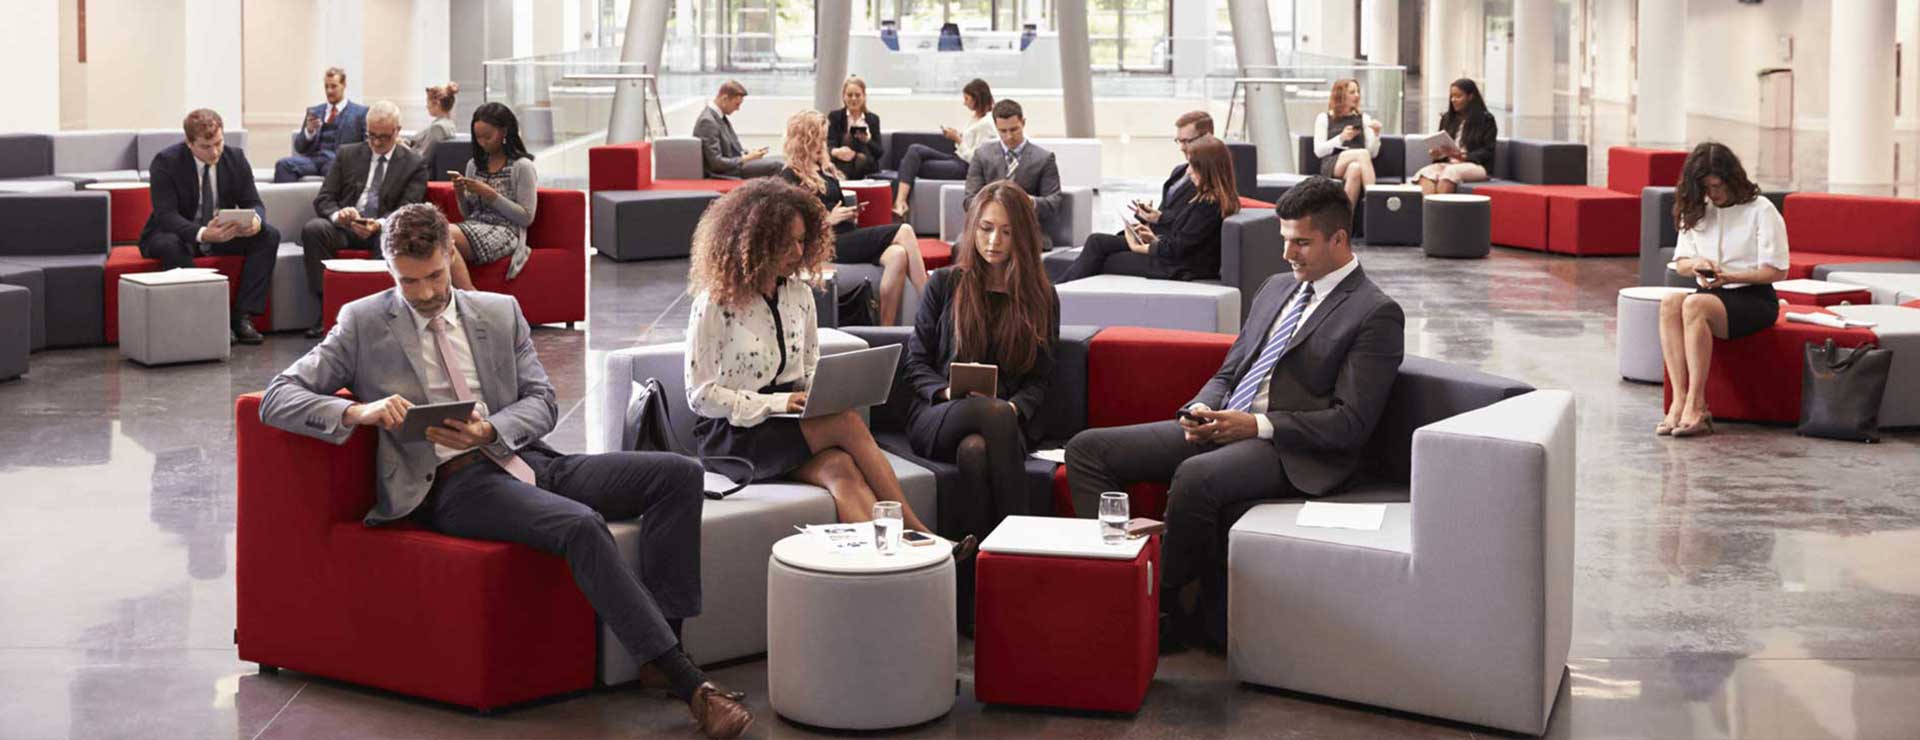 Business people sitting in a modern looking lobby